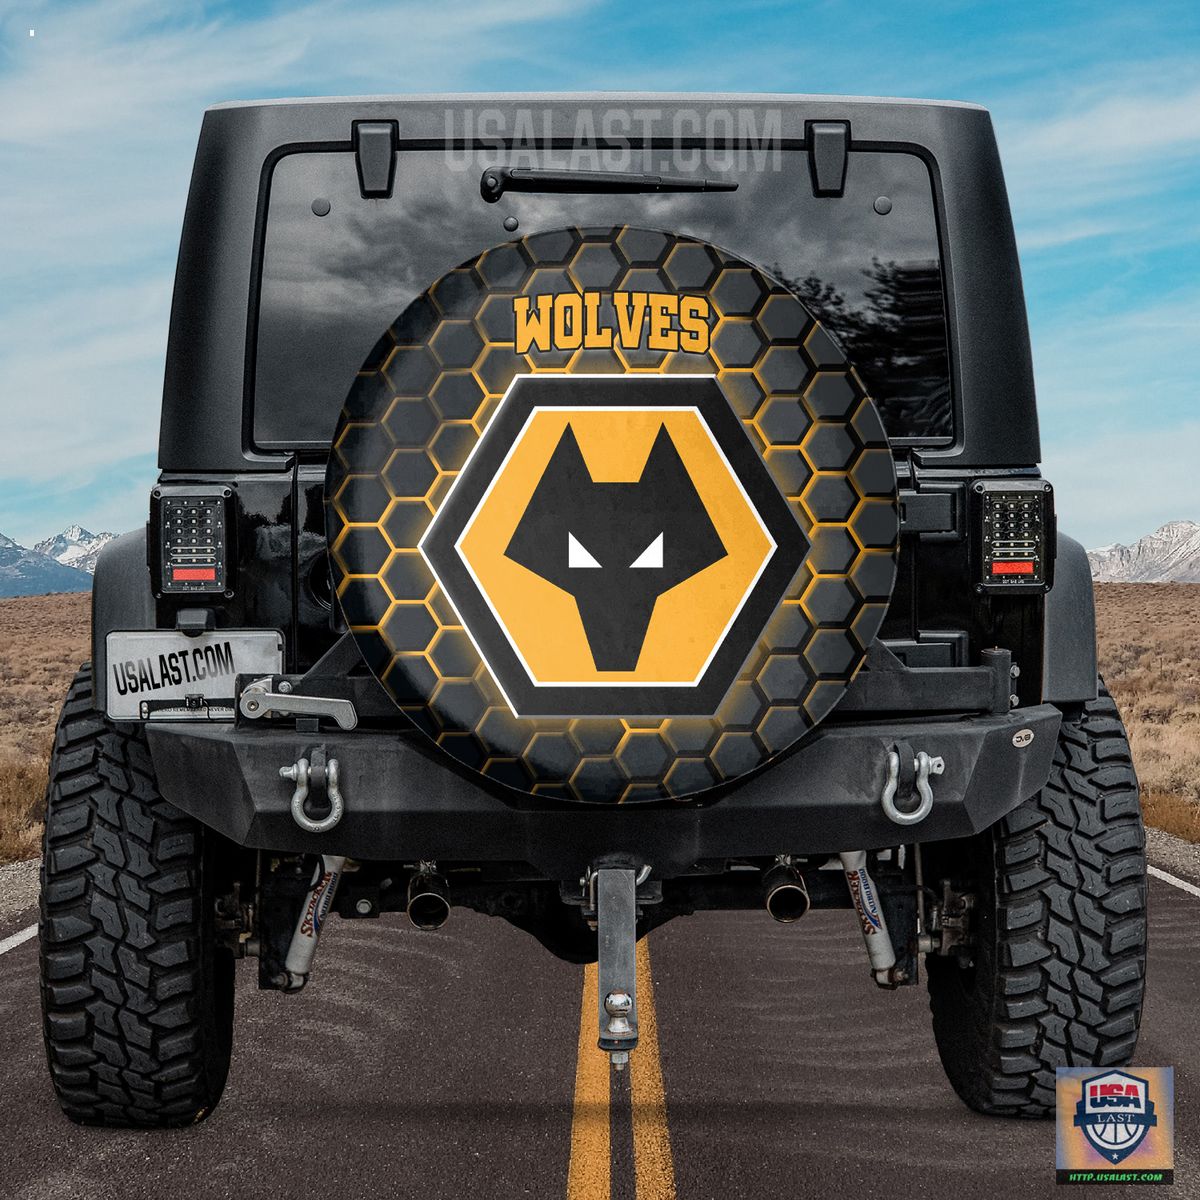 Wolverhampton Wanderers FC Spare Tire Cover - Eye soothing picture dear